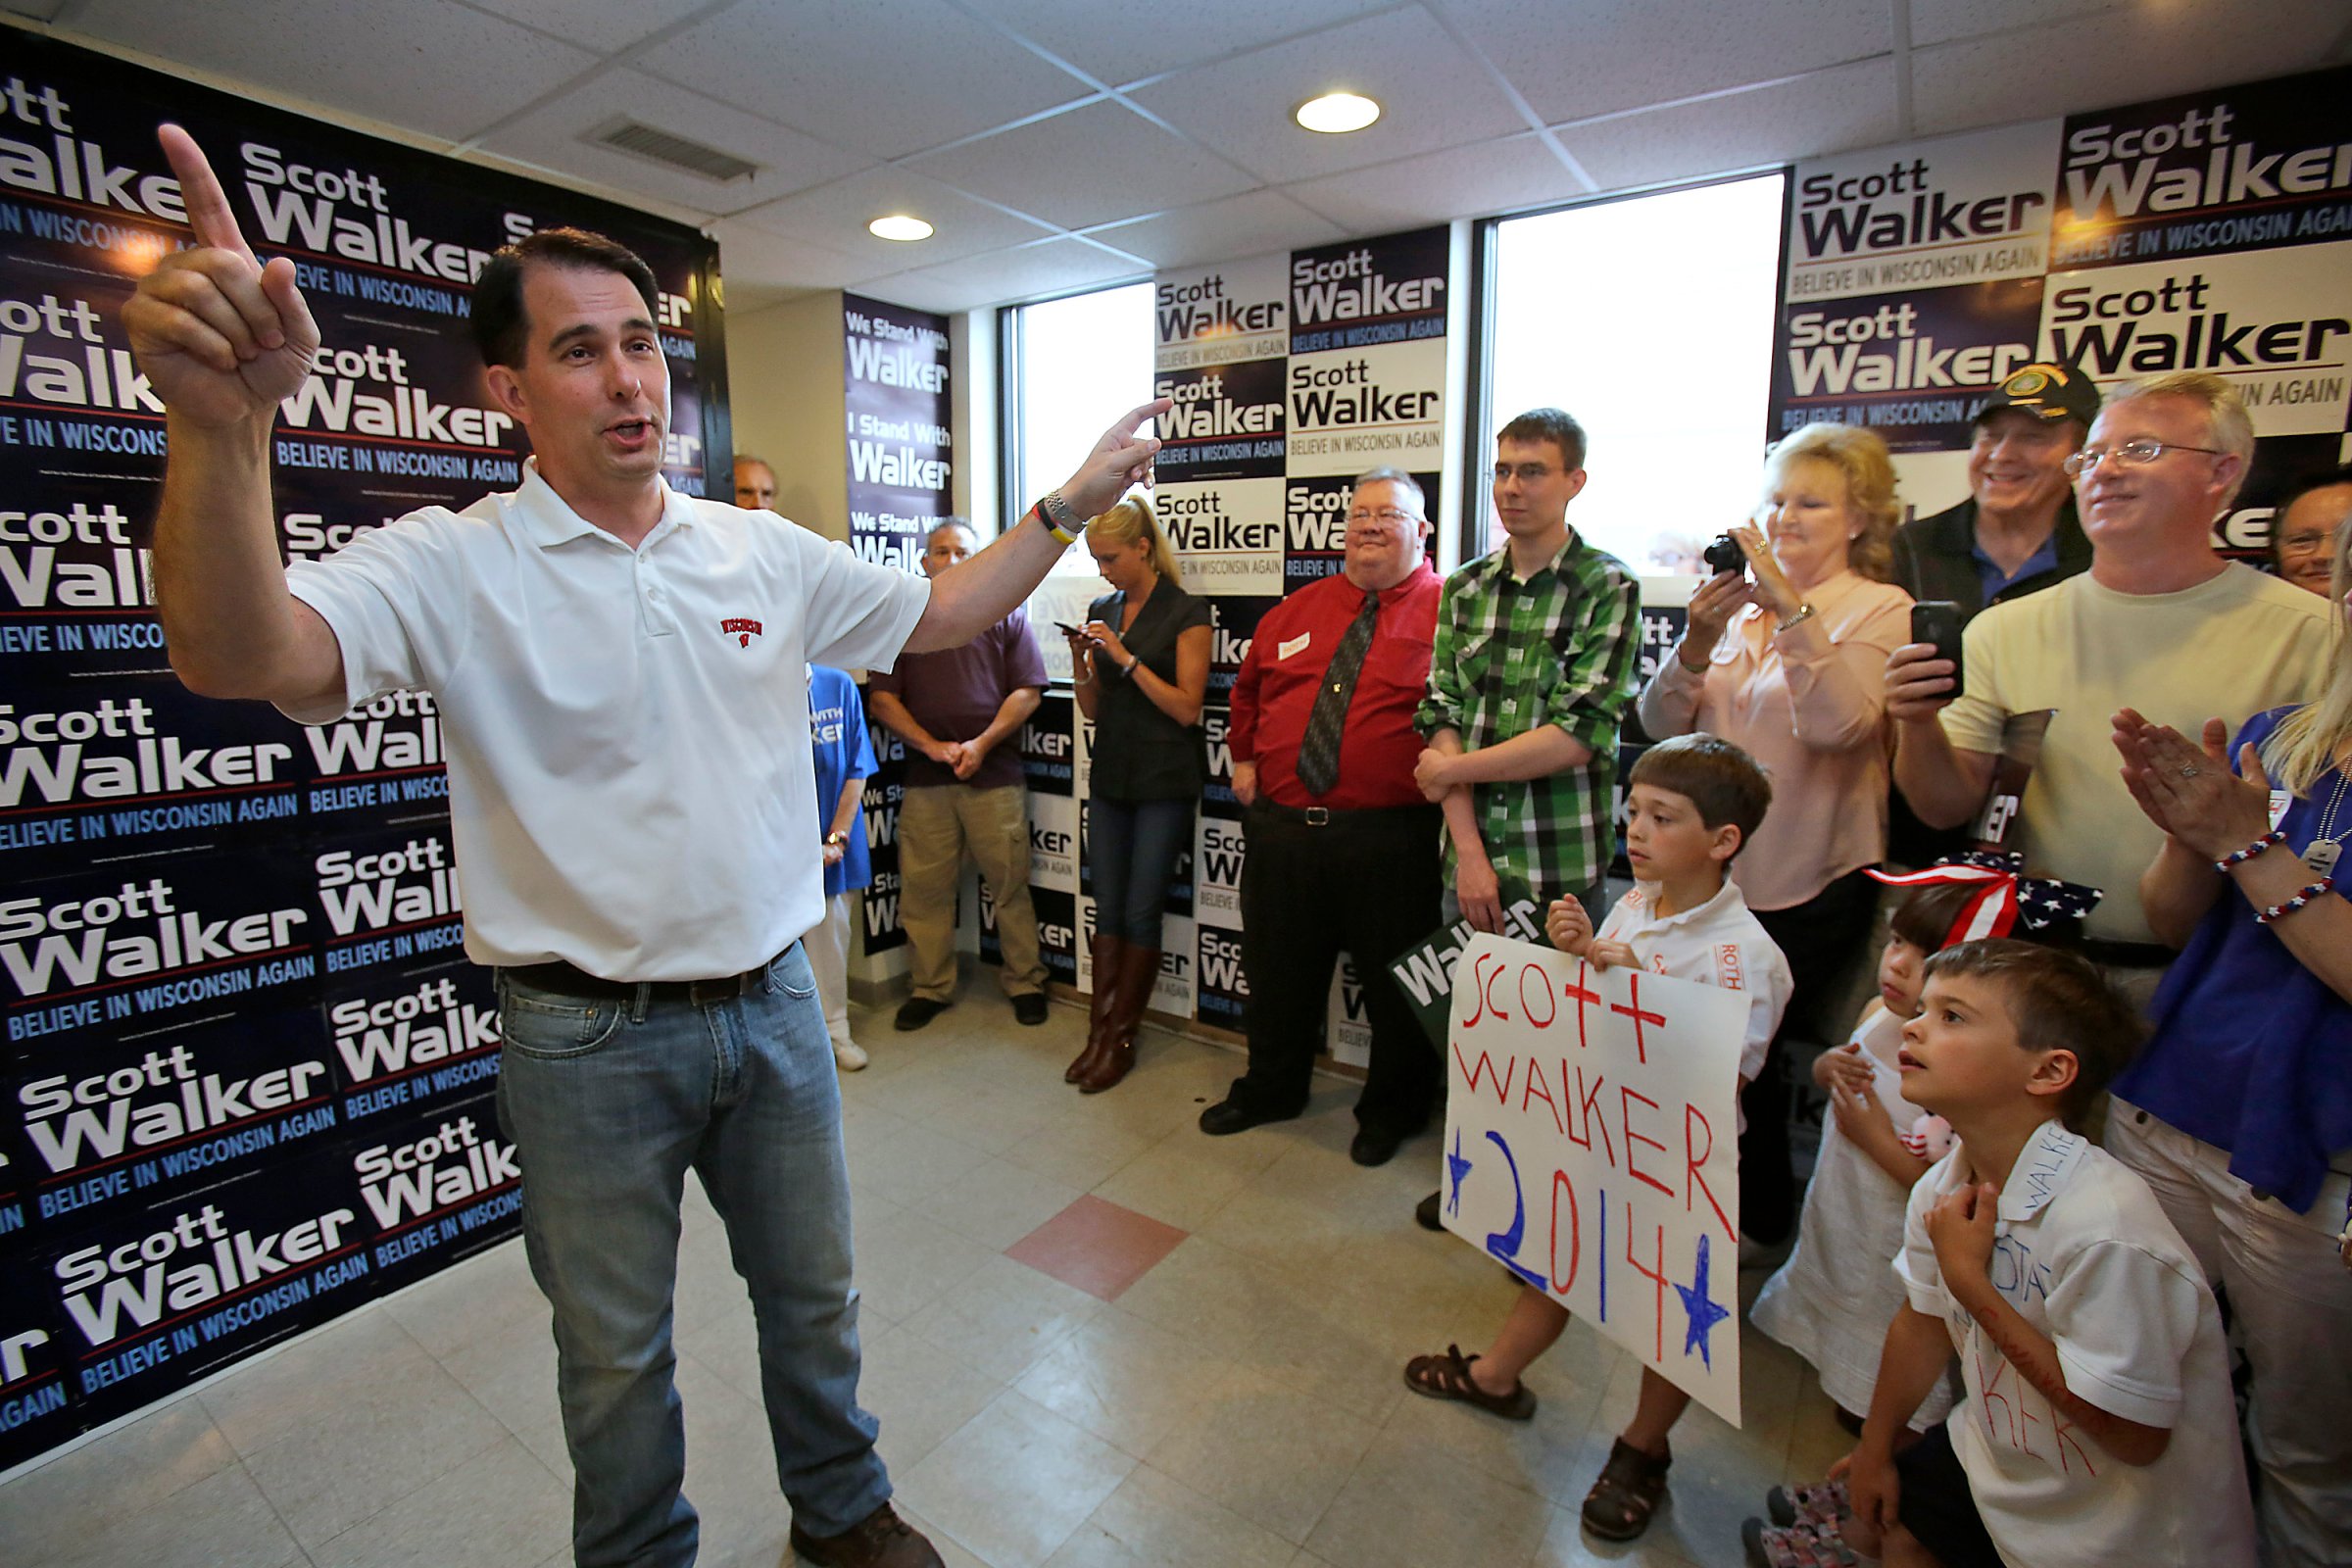 Wisconsin Governor Scott Walker makes a stop at the Republican Party of Wisconsin Appleton Headquarters Saturday, June 21, 2014 in Appleton, Wis.